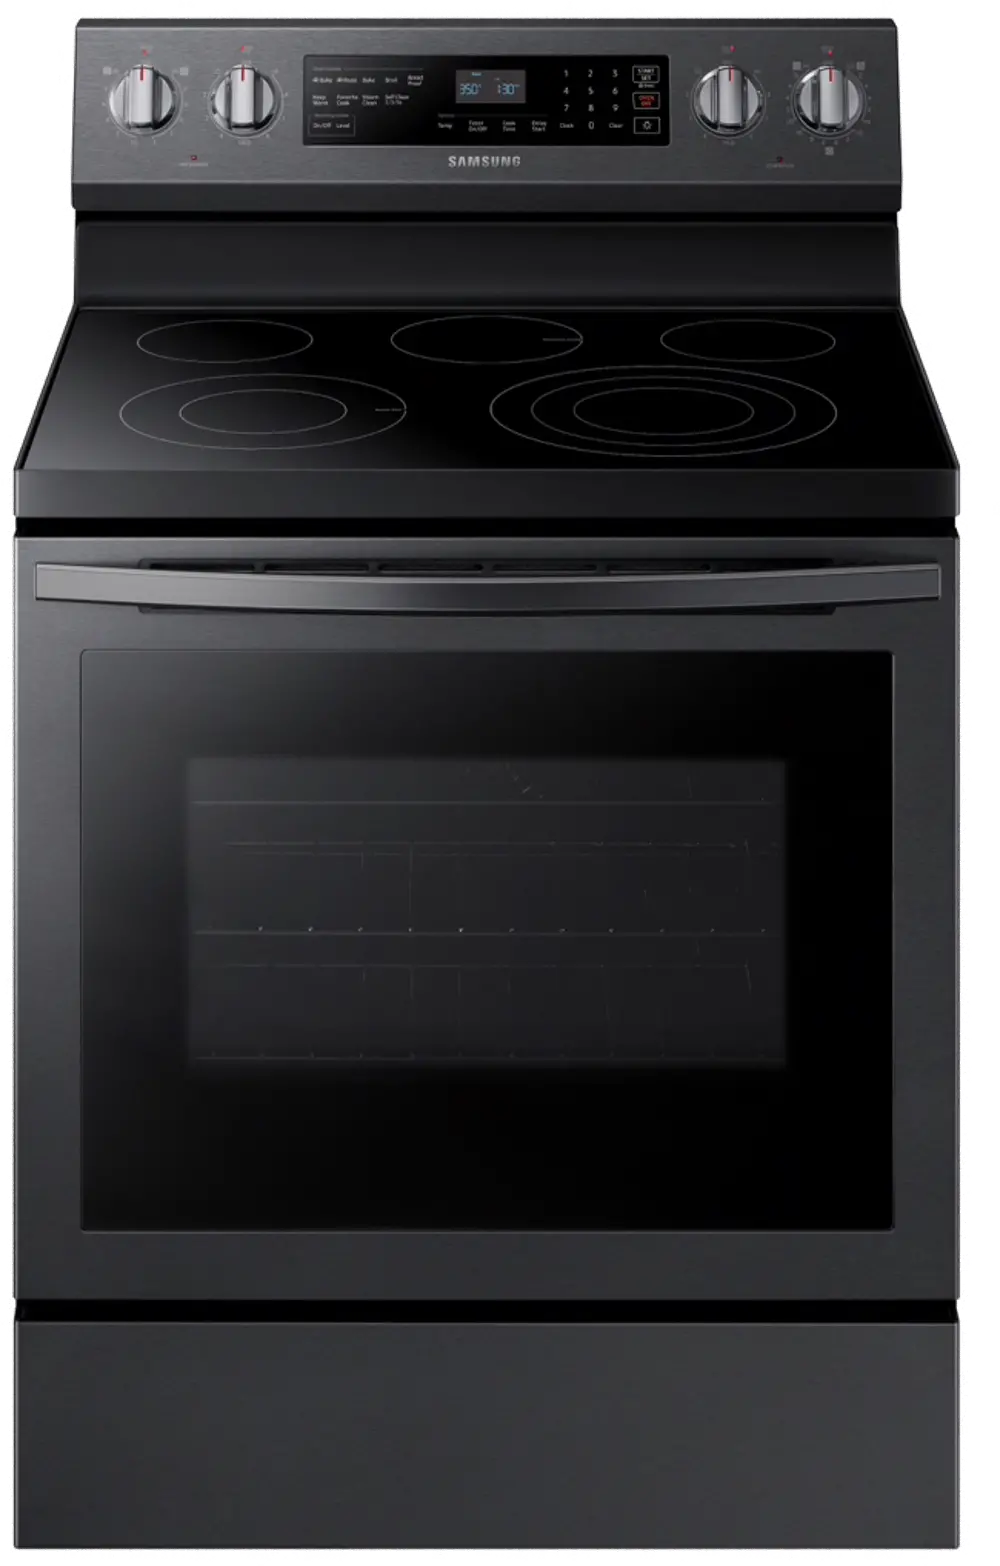 NE59R6631SG Samsung 30 Inch Electric Convection Range - 5.9 cu. ft. Black Stainless Steel-1